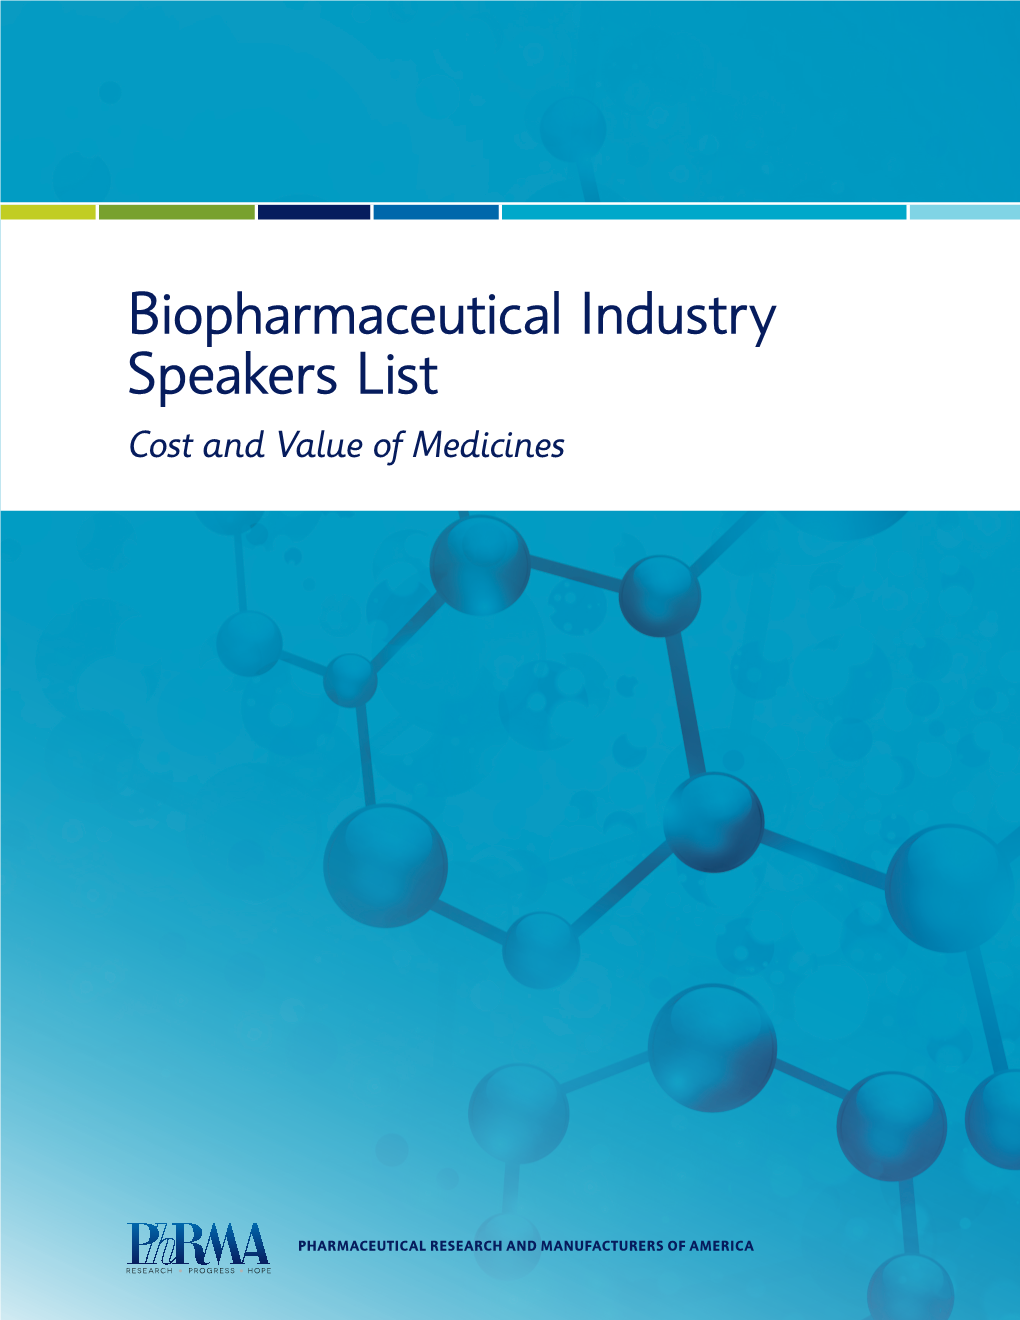 Biopharmaceutical Industry Speakers List Cost and Value of Medicines